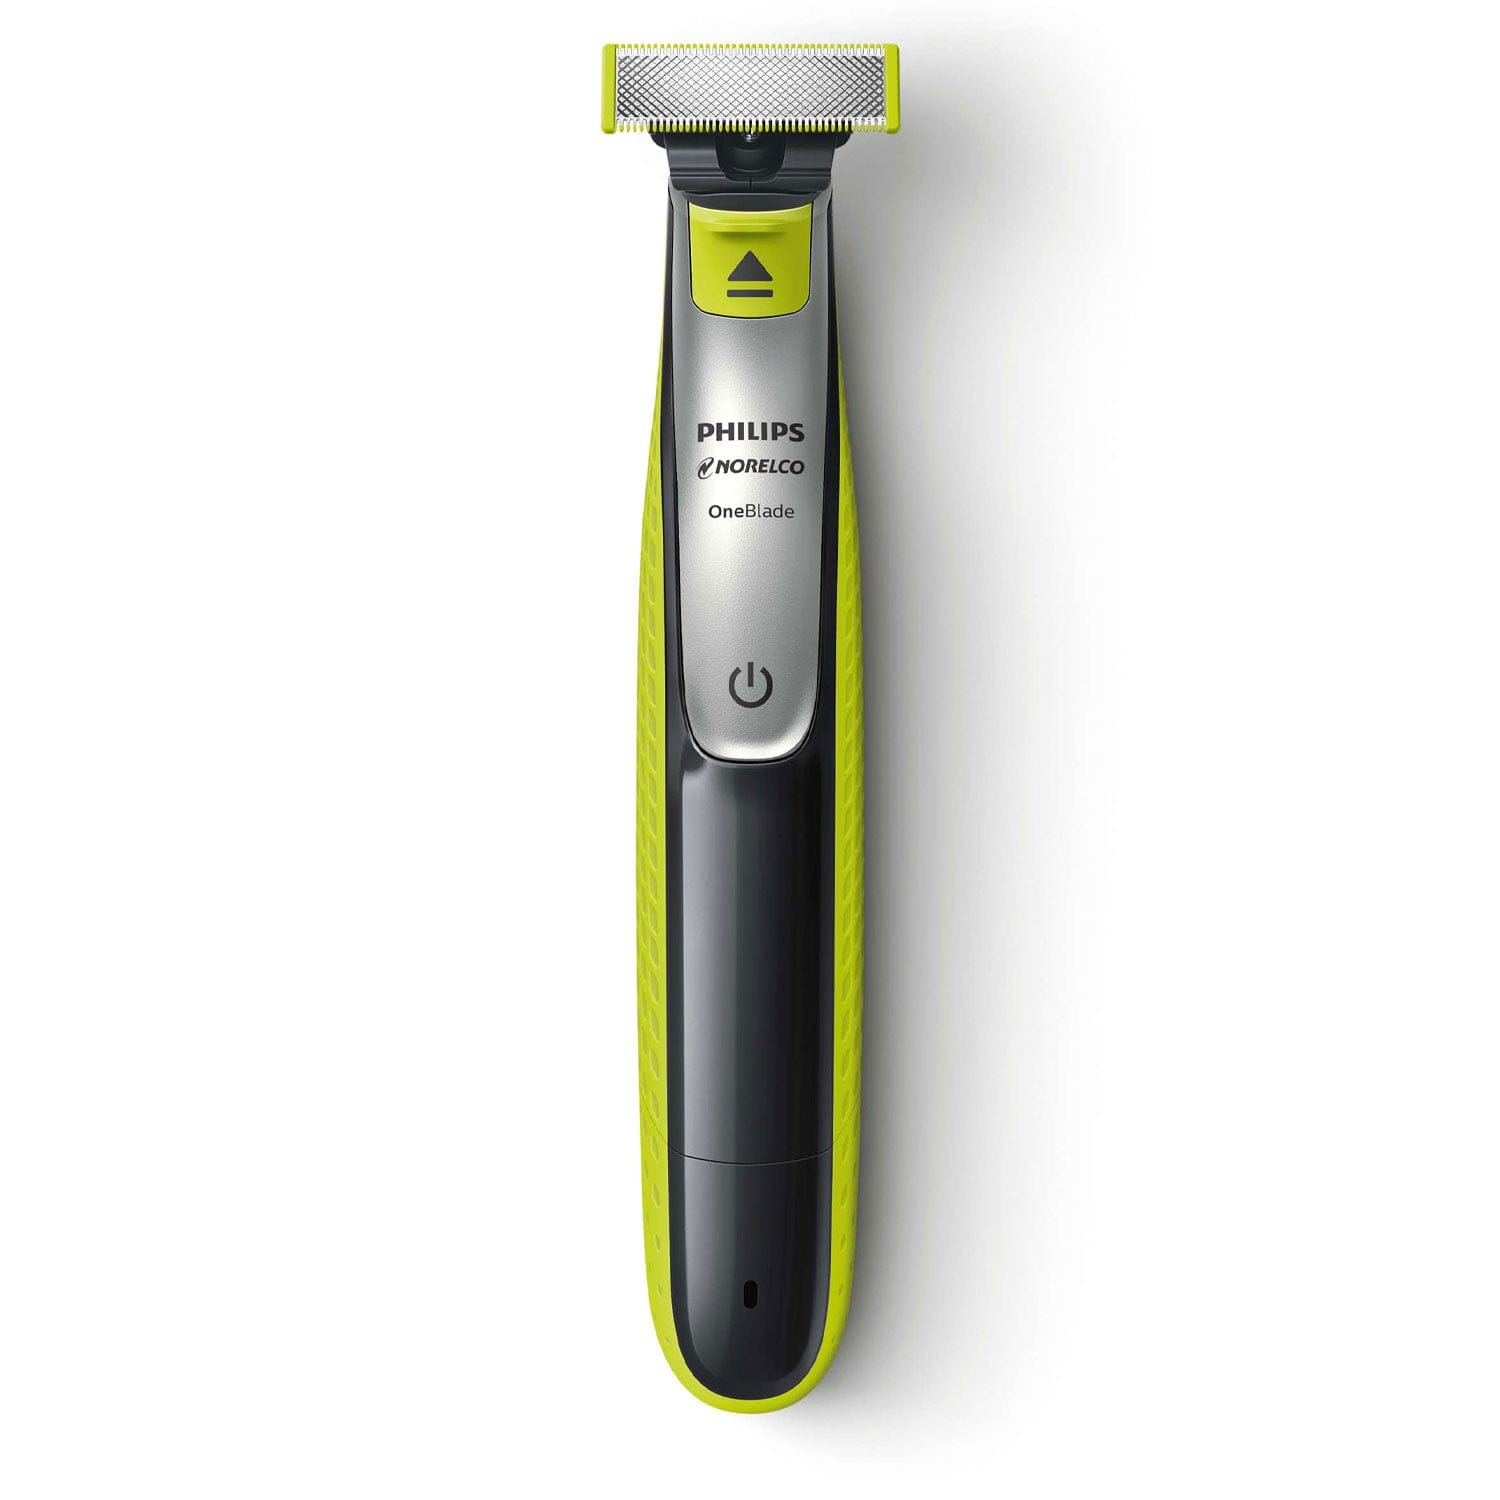 Philips Norelco OneBlade Face+Body Hair Trimmer - Grooming Lounge